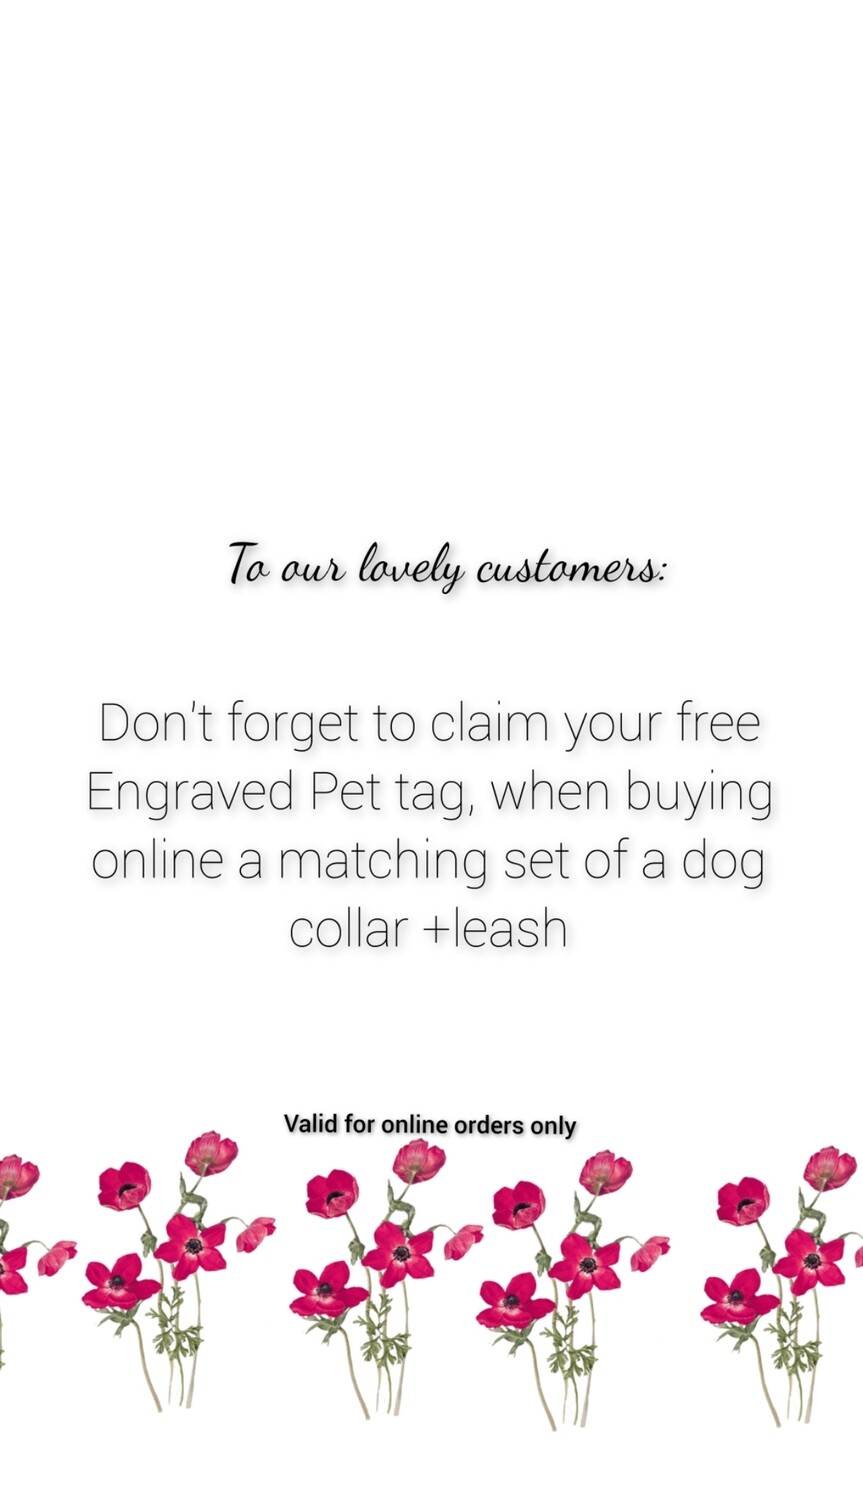 PET TAG: Free, when purchasing a matching set